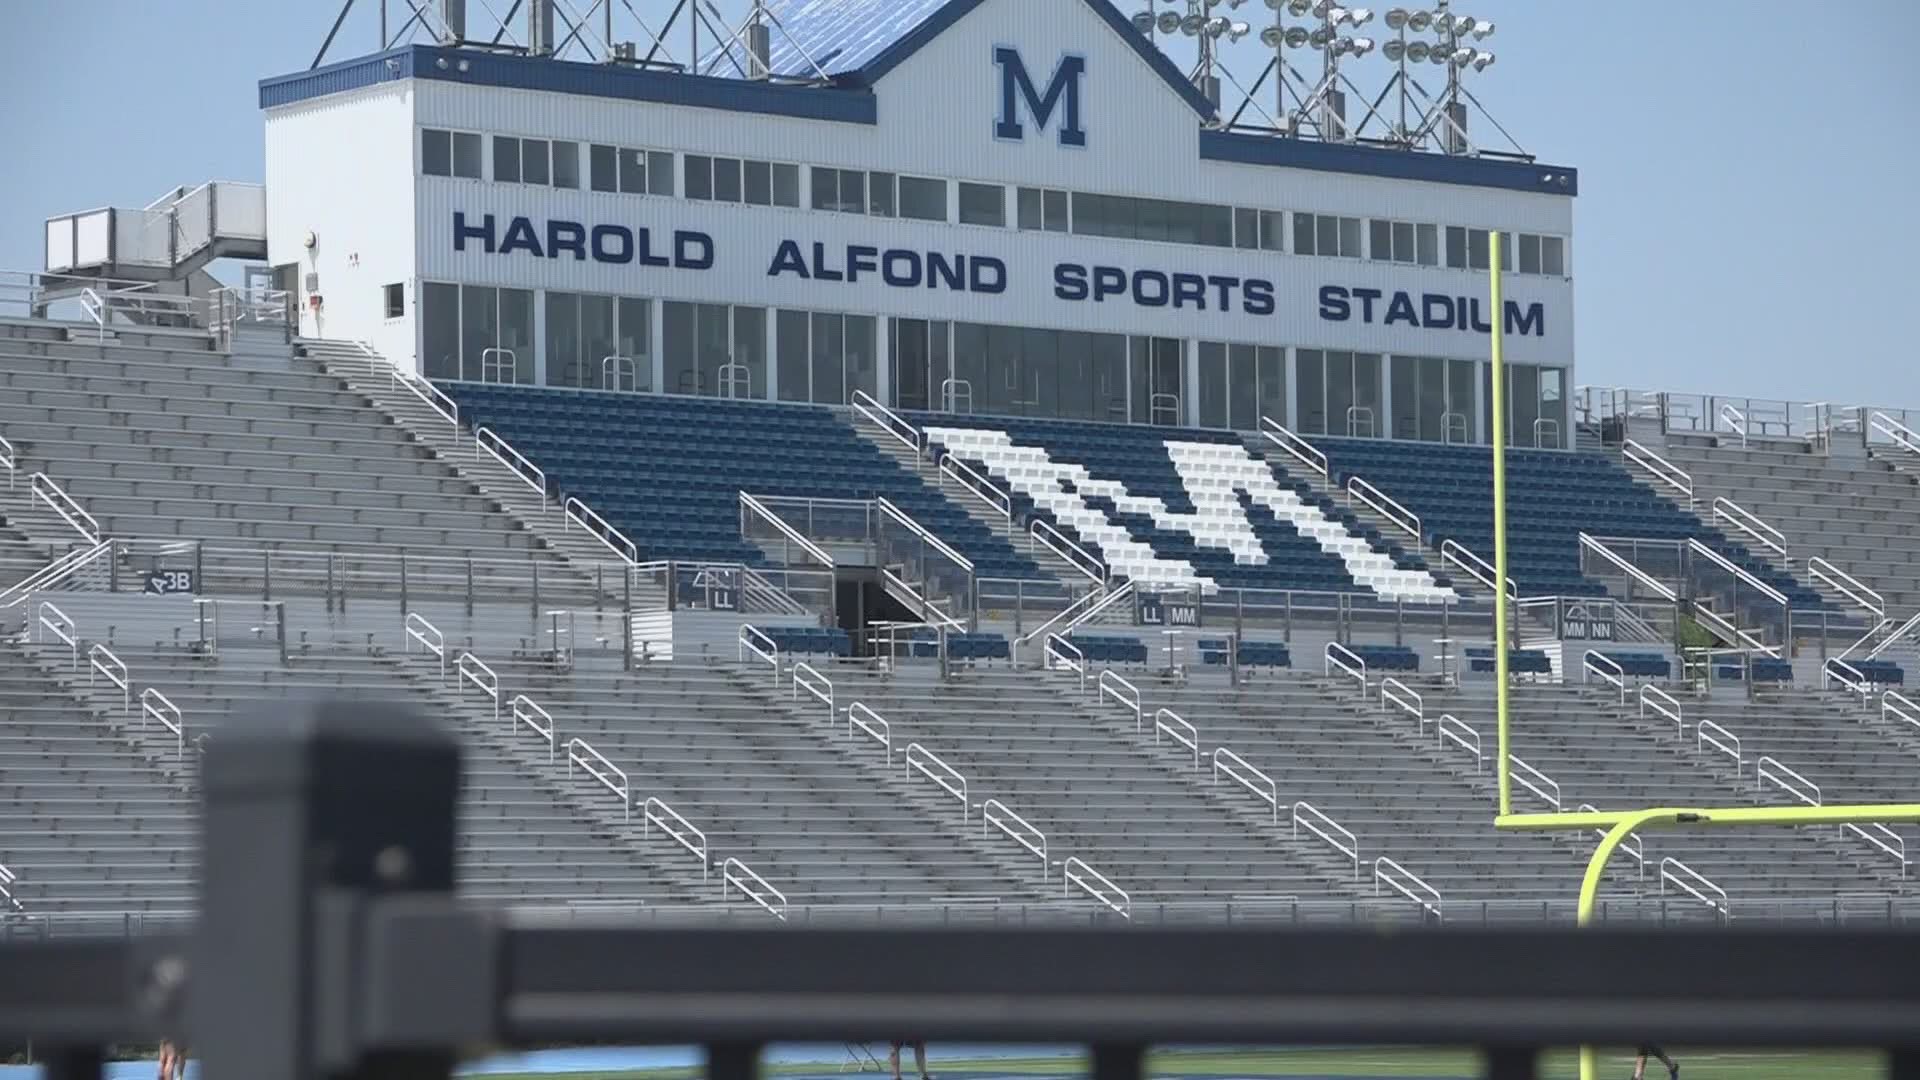 UMaine announces postponement, not cancellation, of fall sports